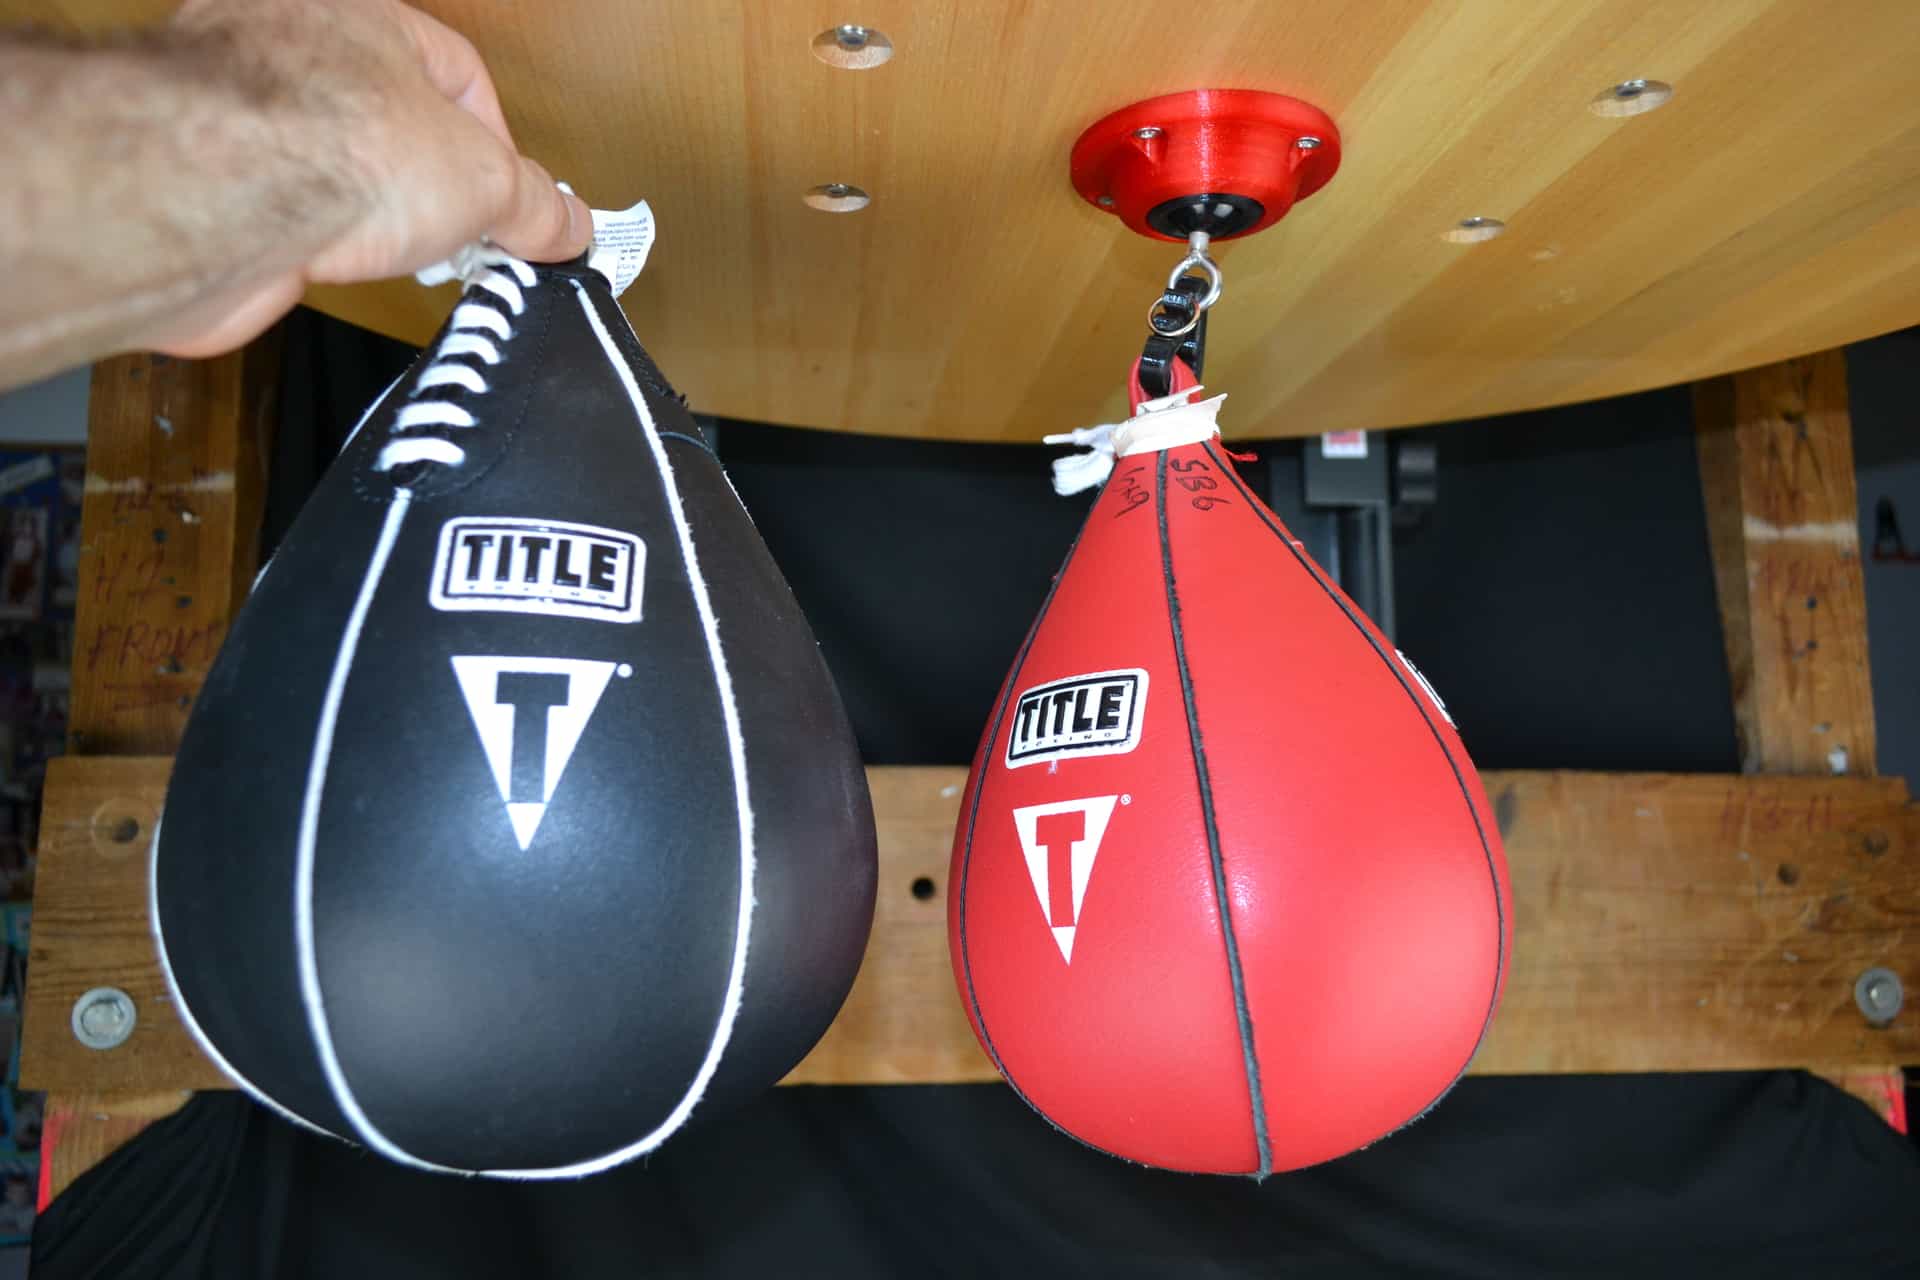 What to Look For When Purchasing a Speed Bag